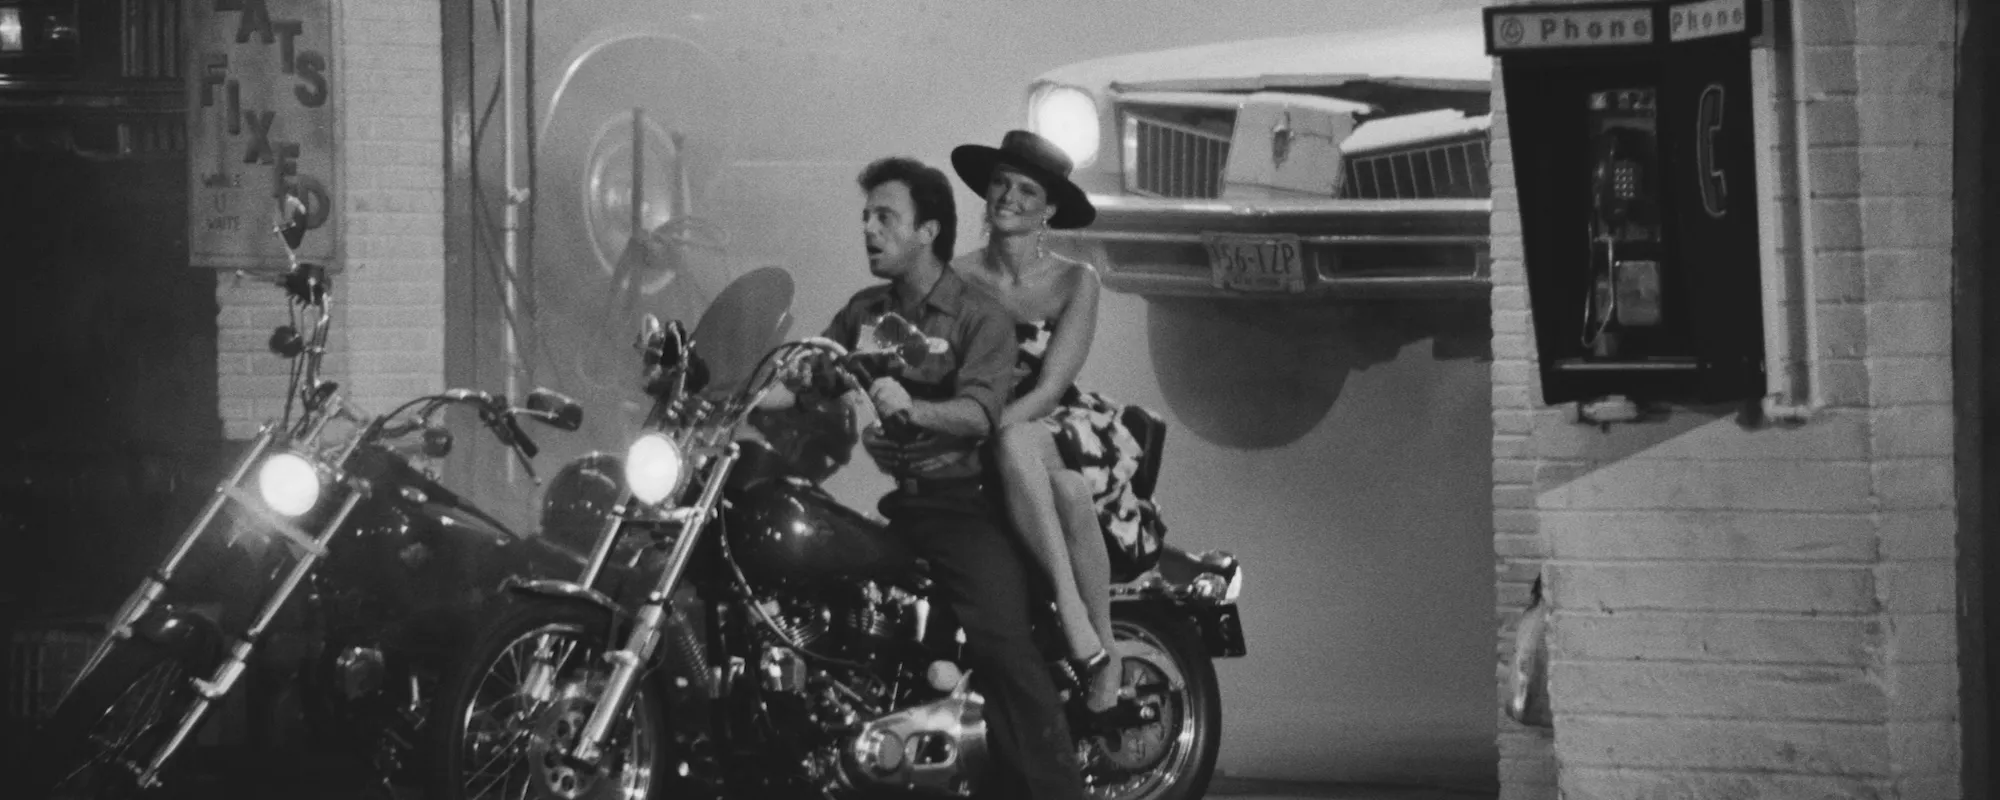 Watch Billy Joel Sing “Uptown Girl” to Ex-Wife Christie Brinkley More than 40 Years After He First Wrote It About Her